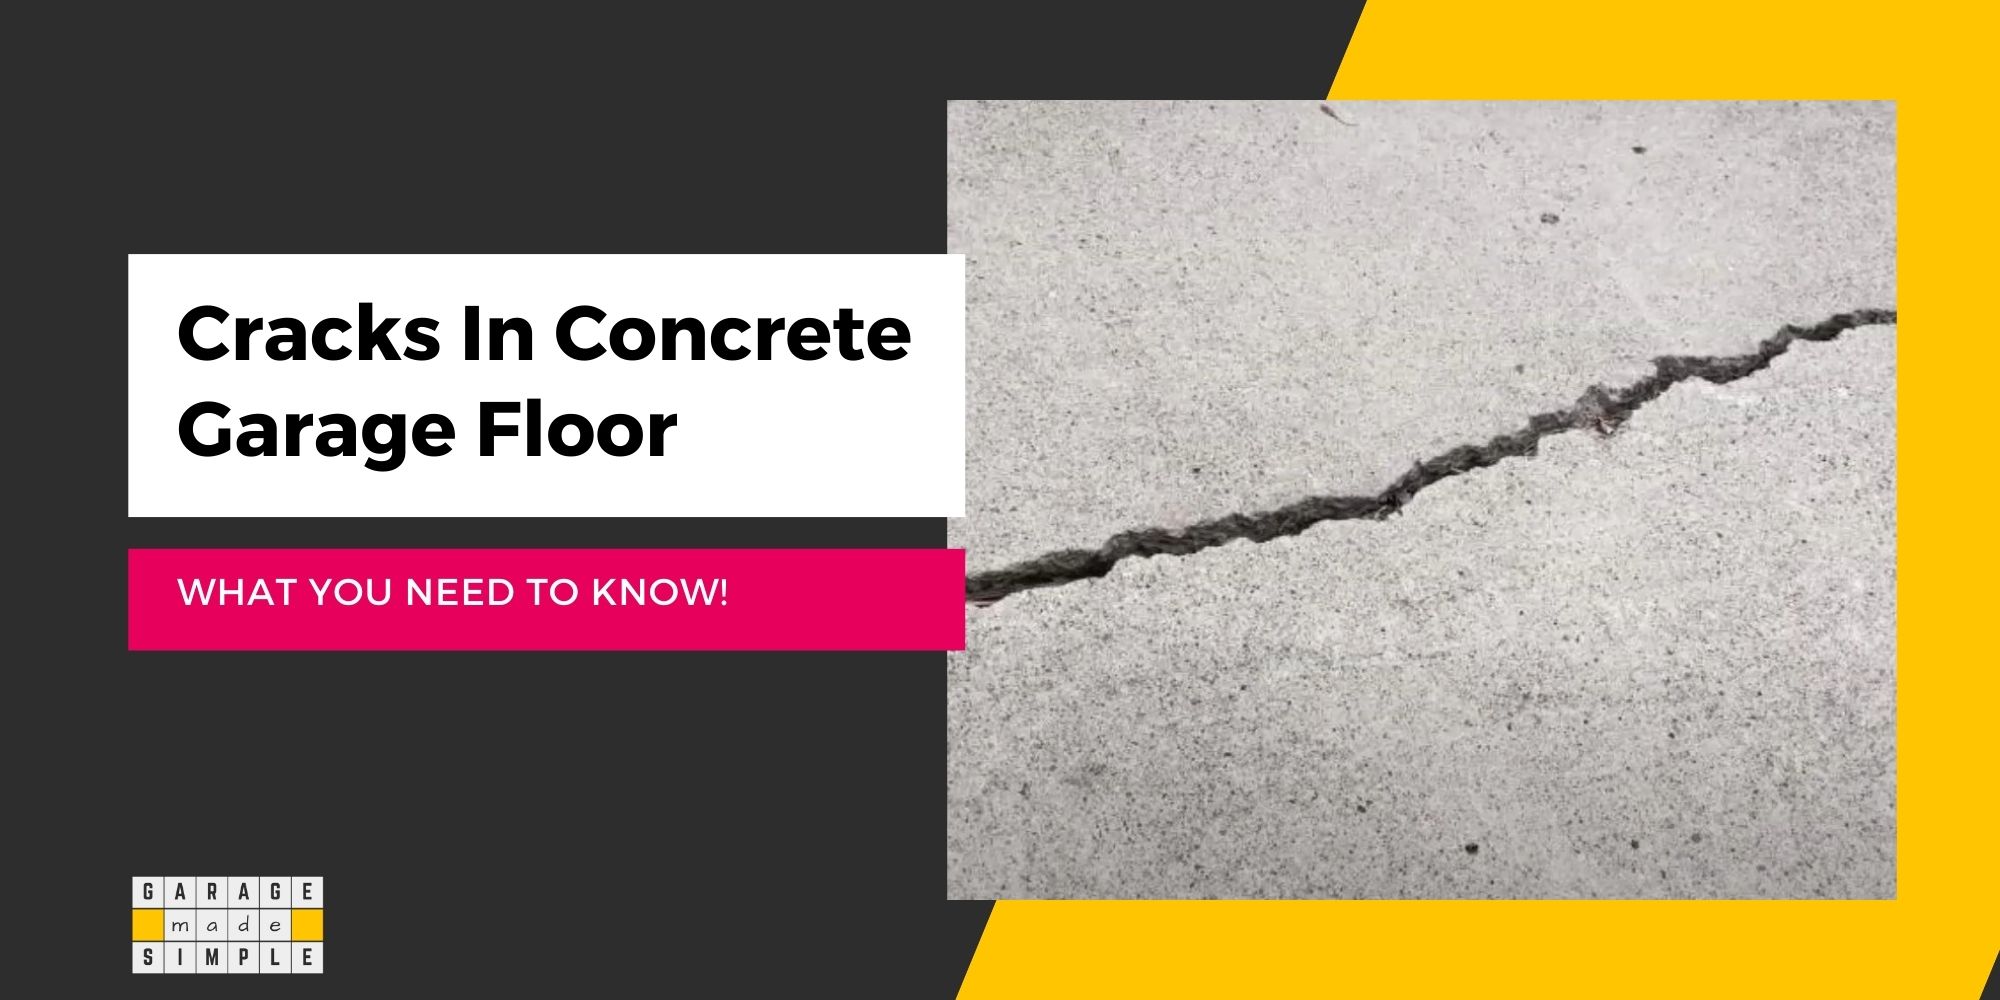 Cracks in Concrete Garage Floor: What You Need To Know!